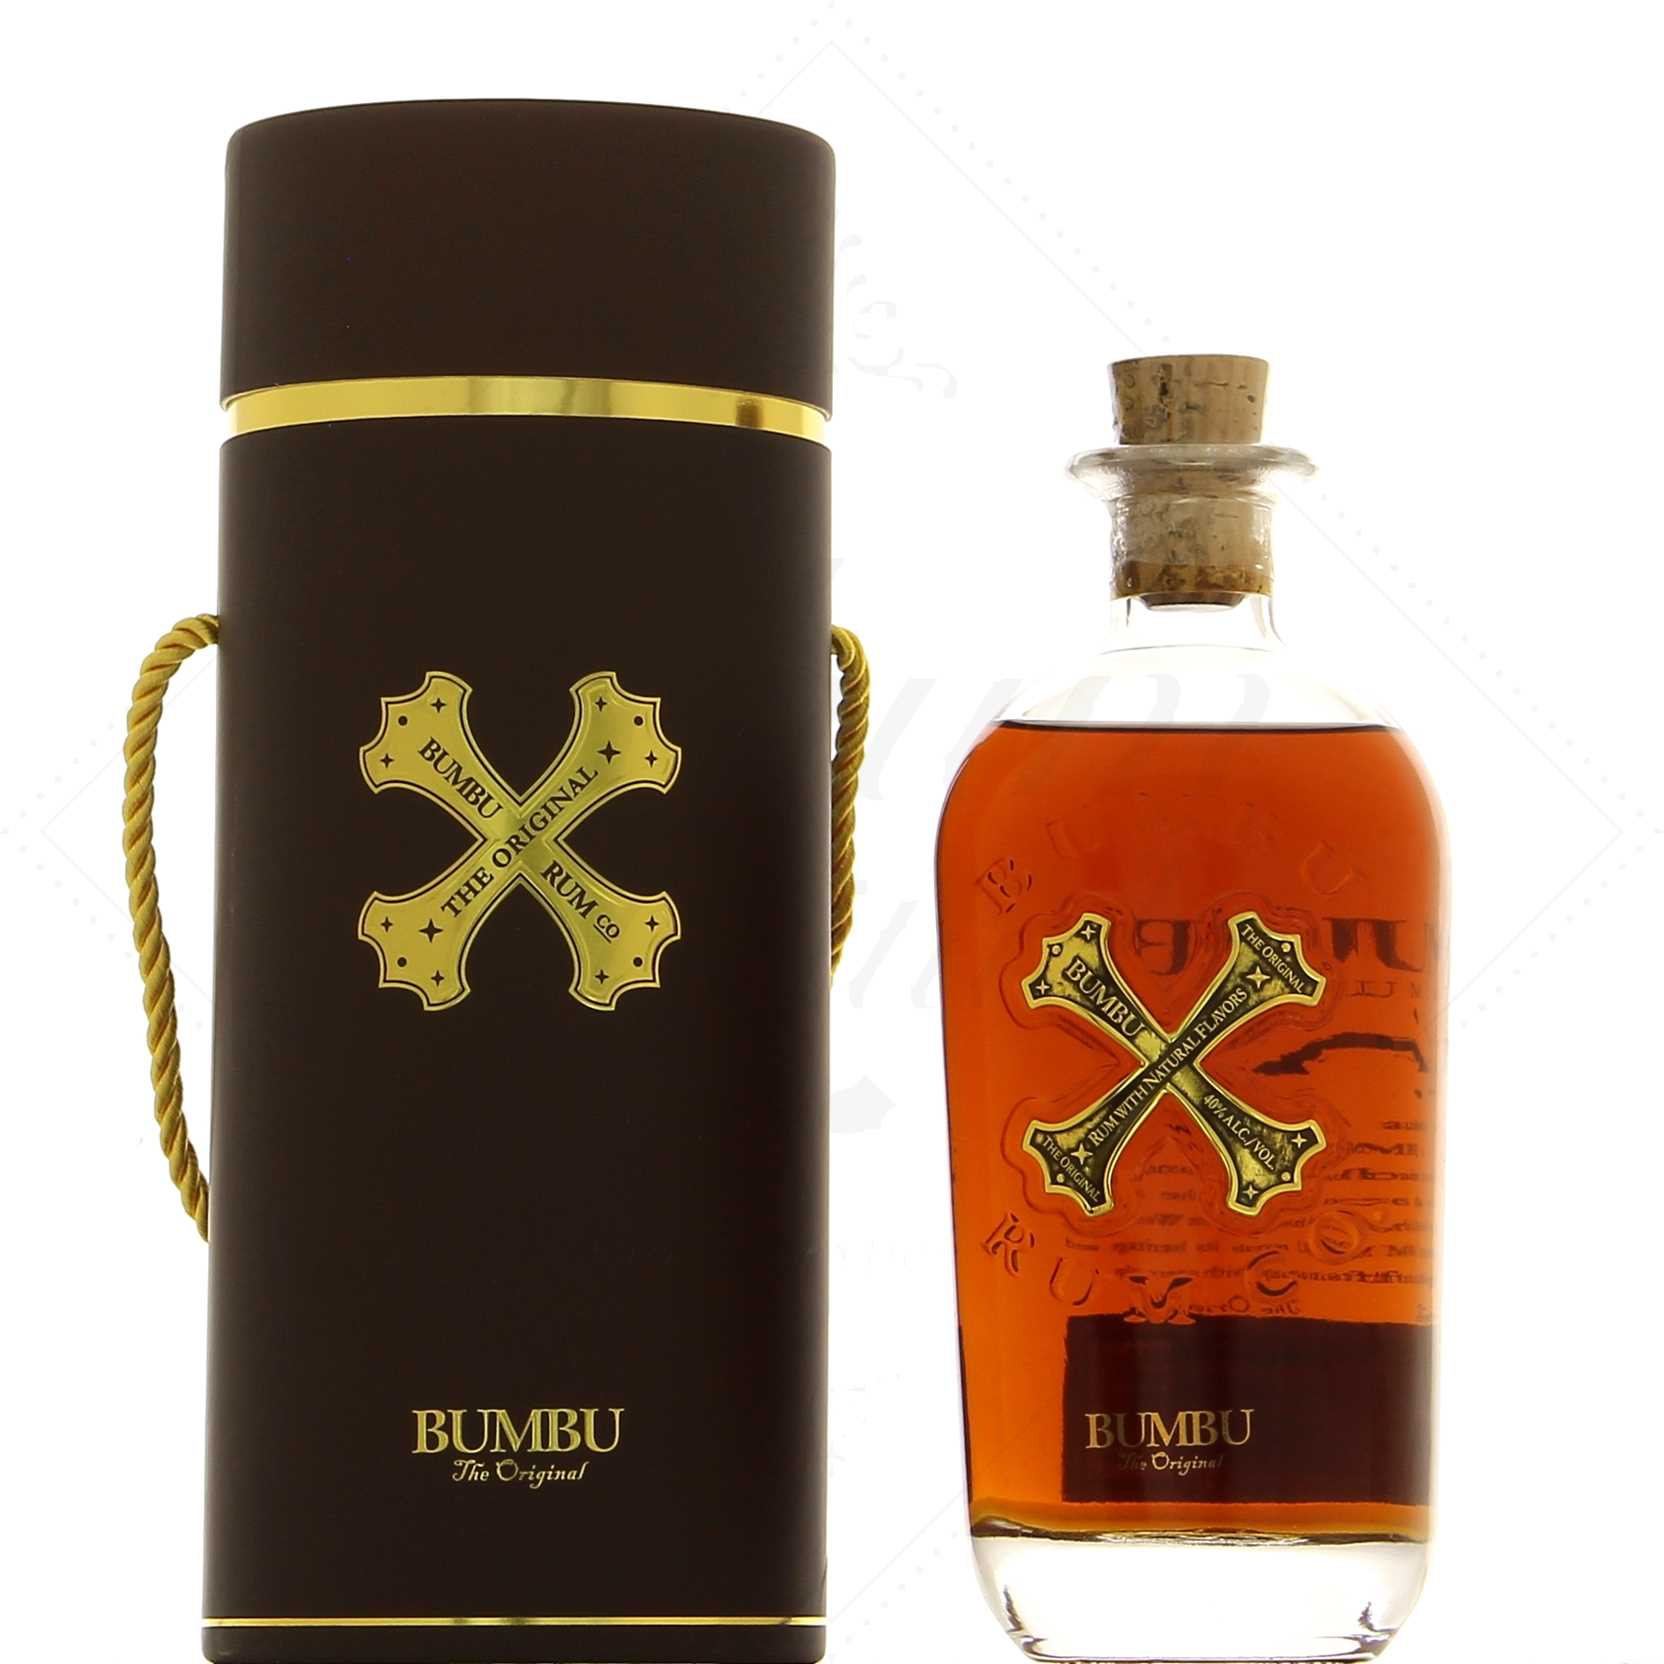 - discover the Attitude brand\'s Rhum products Bumbu: